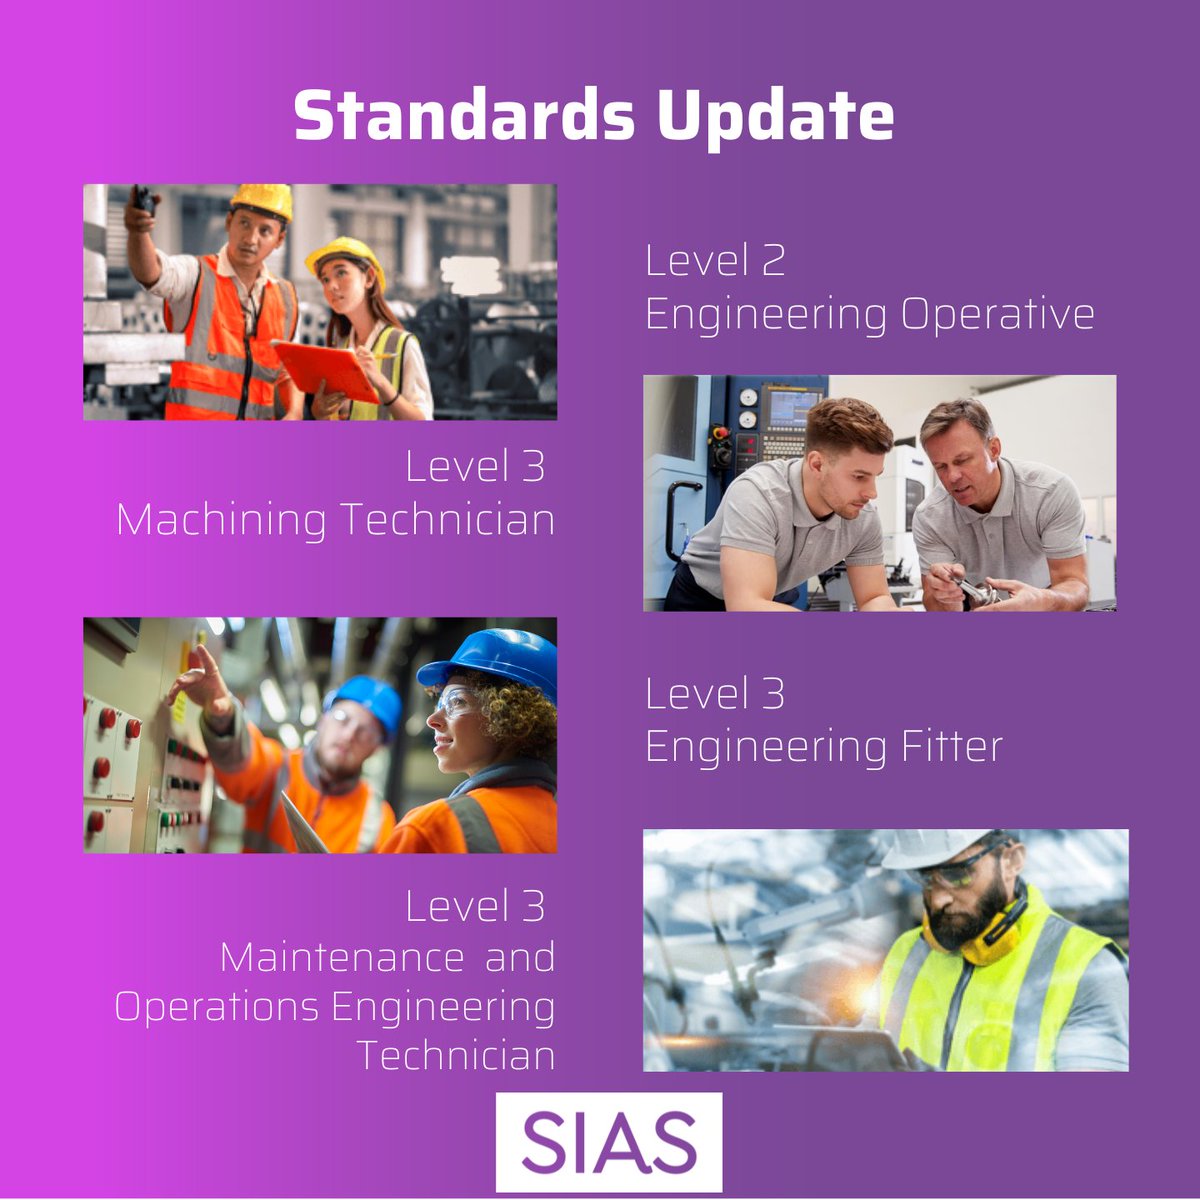 Have you noted recent changes to some apprenticeship   standards?

If you have   questions, get in touch with the operations team who will be happy to help.
#EPAO #endpointassessment   #keepingyouupdated